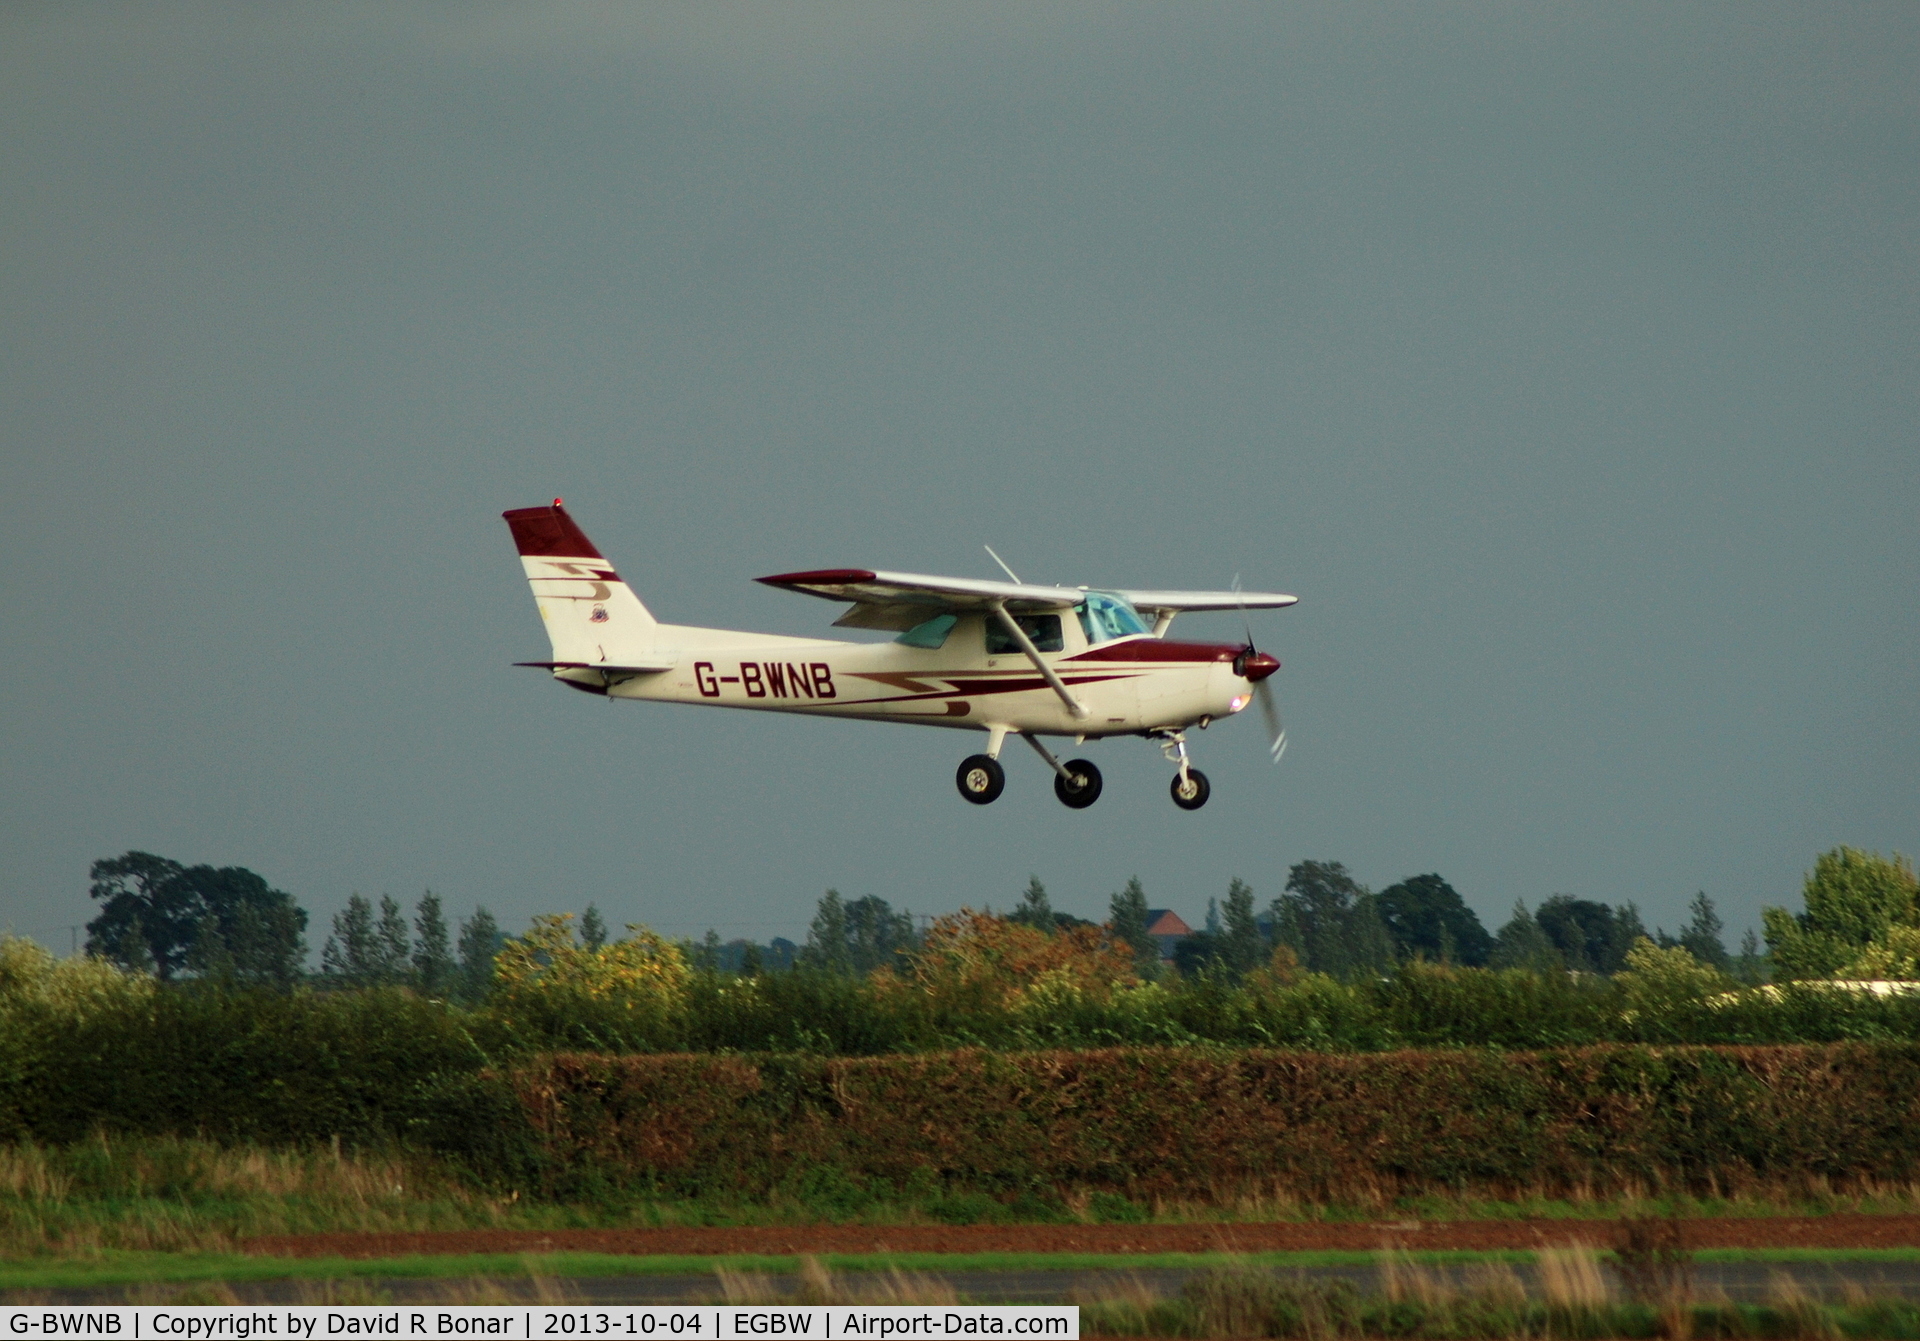 G-BWNB, 1978 Cessna 152 C/N 152-80051, Crossing the fence ahead of a Thunderstorm